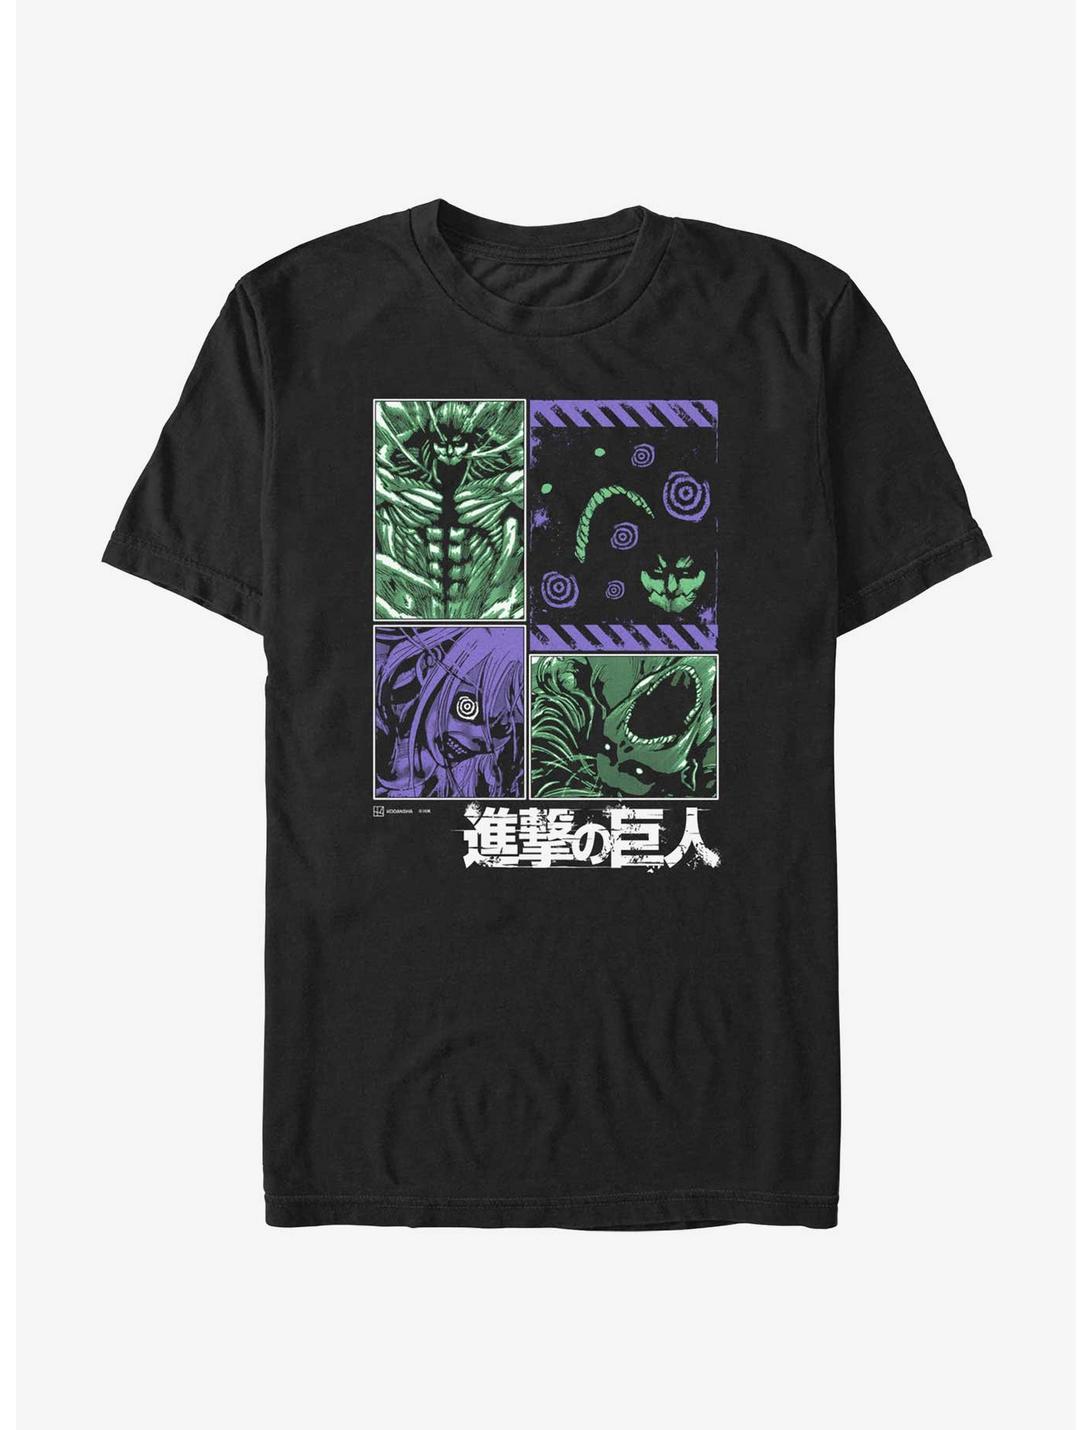 Attack on Titan Armored Founding and Attack Titans T-Shirt, BLACK, hi-res